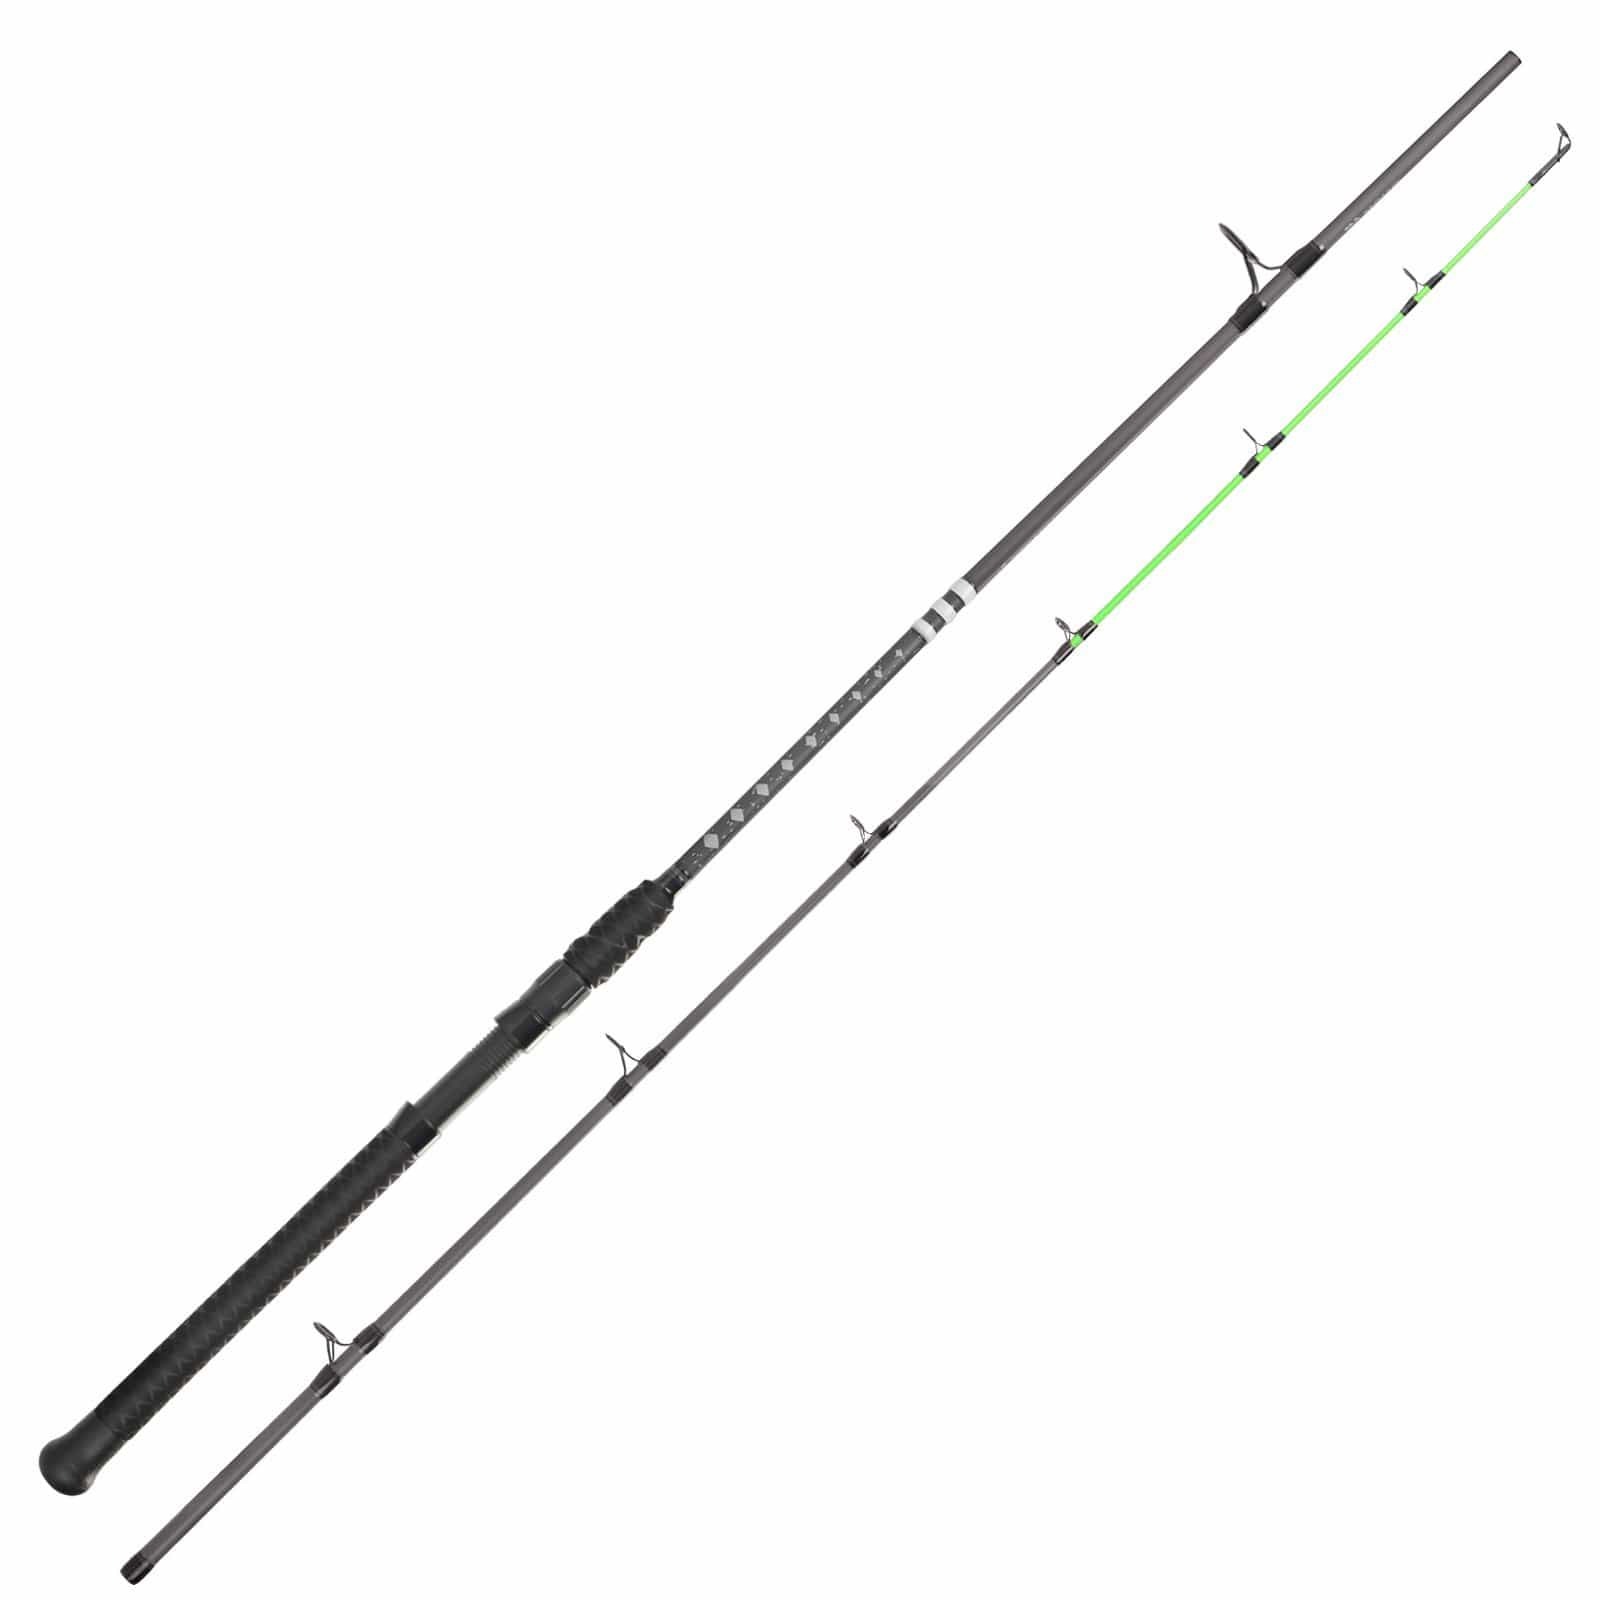 KastKing Casting Rods, High-Strength Components - Kong Fishing Rods